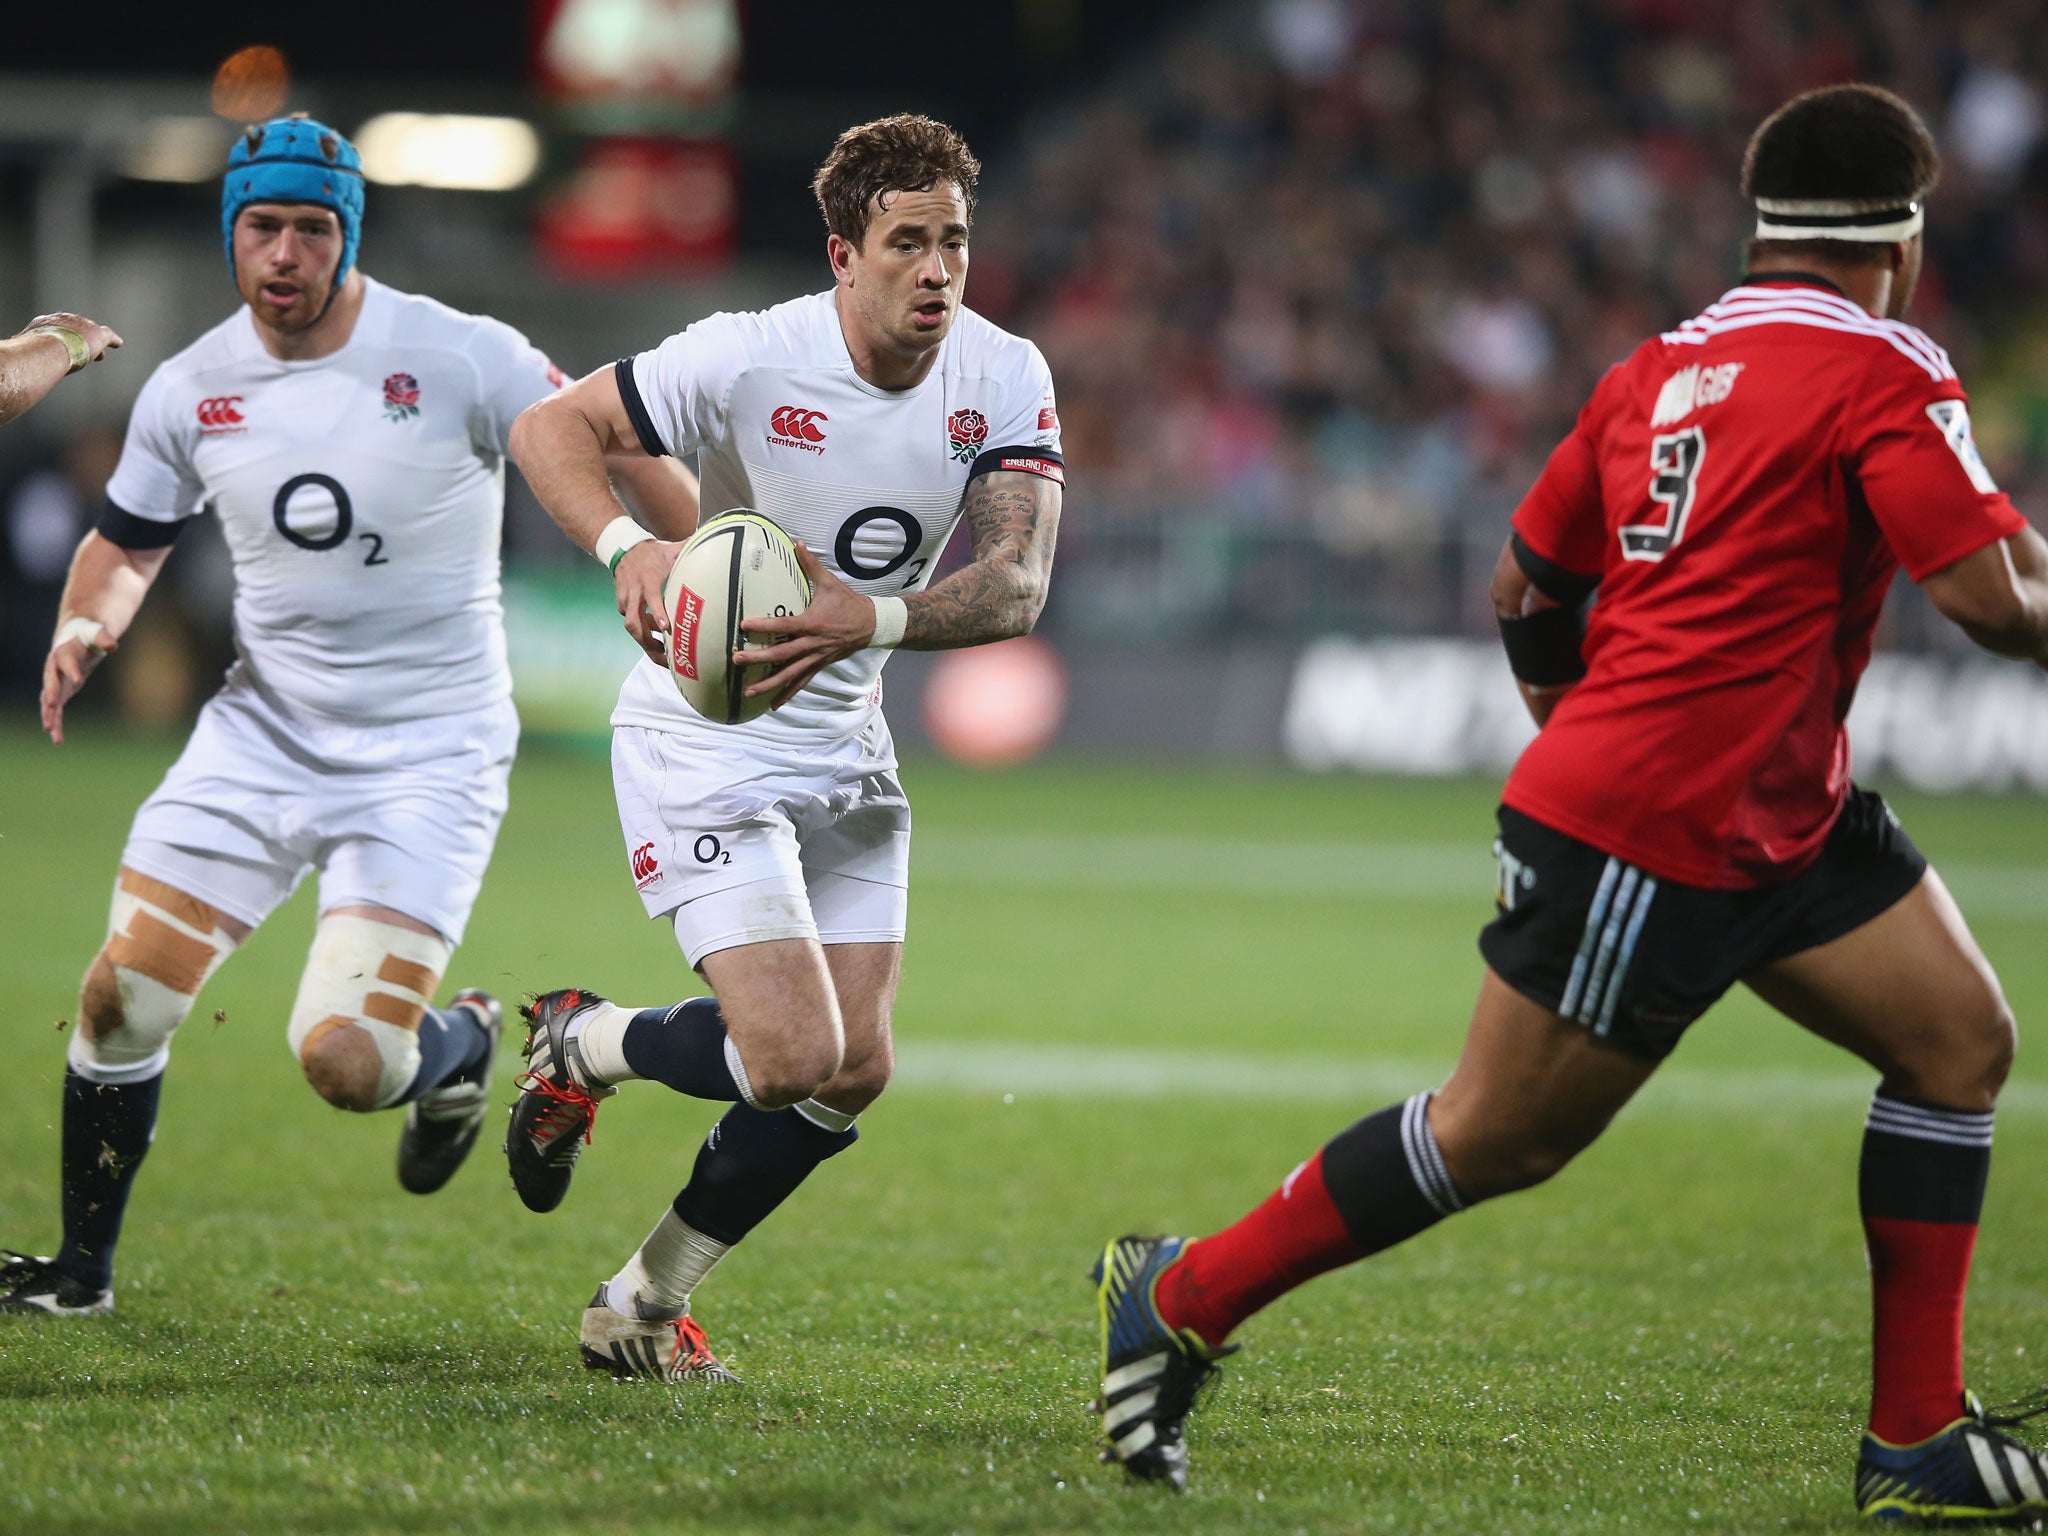 Danny Cipriani stakes his claim for a starting berth against New Zealand with a brilliant cameo against Crusaders